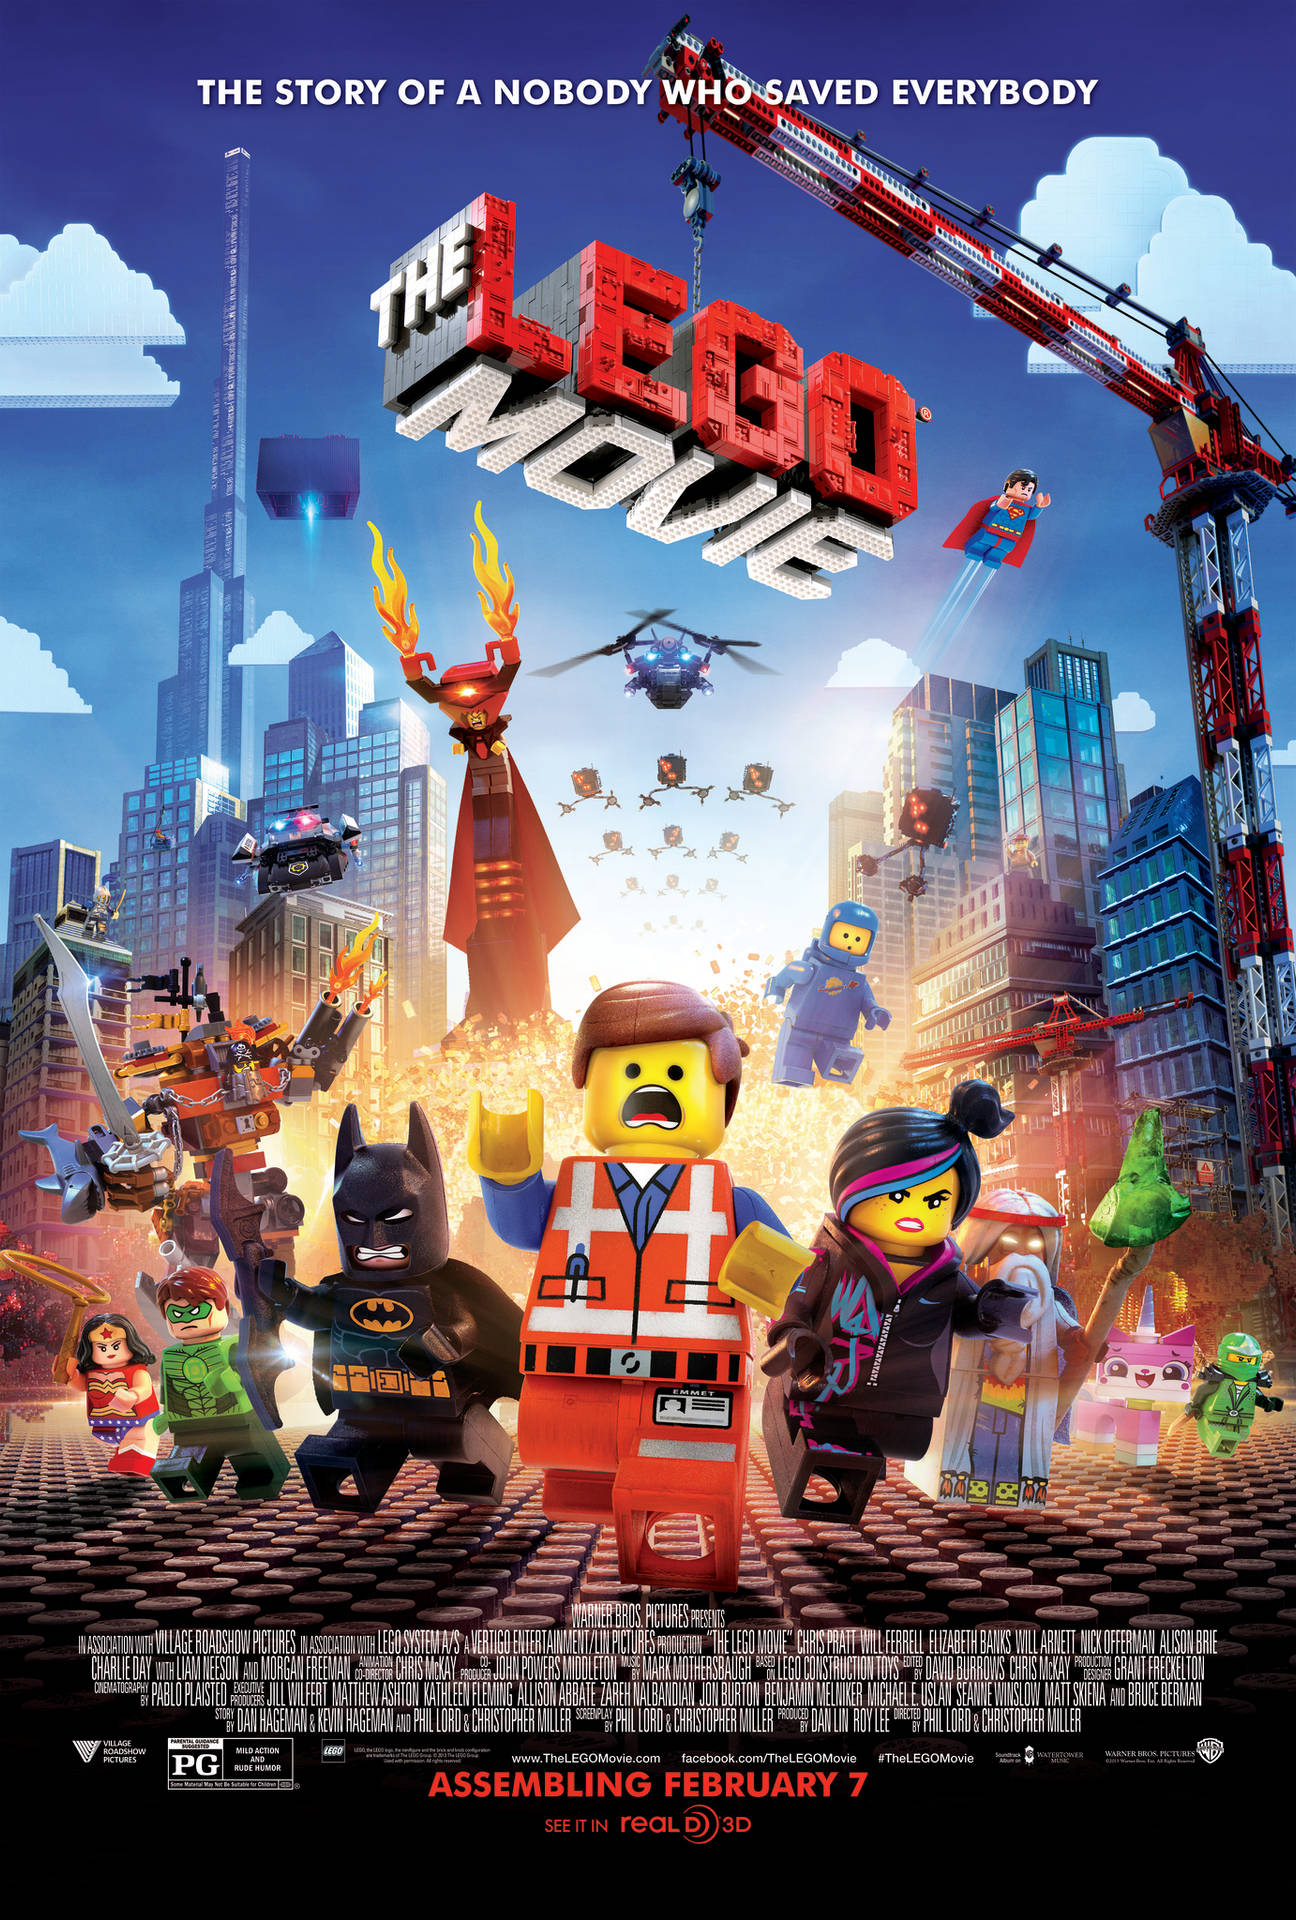 Running The Lego Movie Poster Background